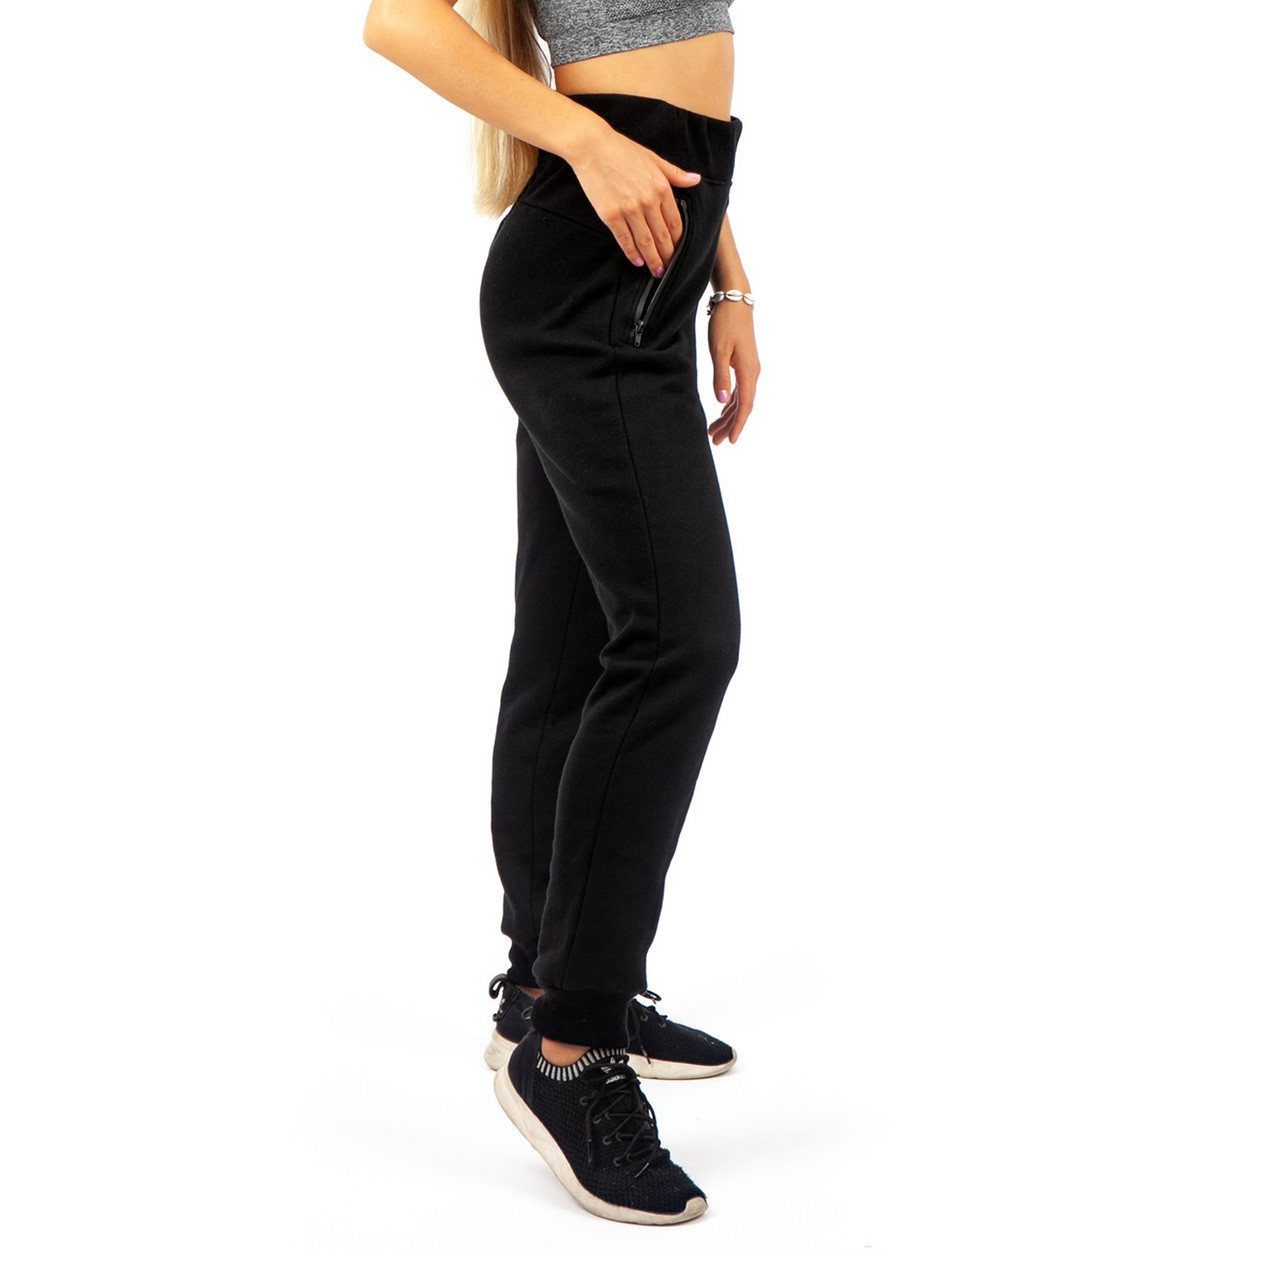 Women's Tall Athletic Pants | American Tall